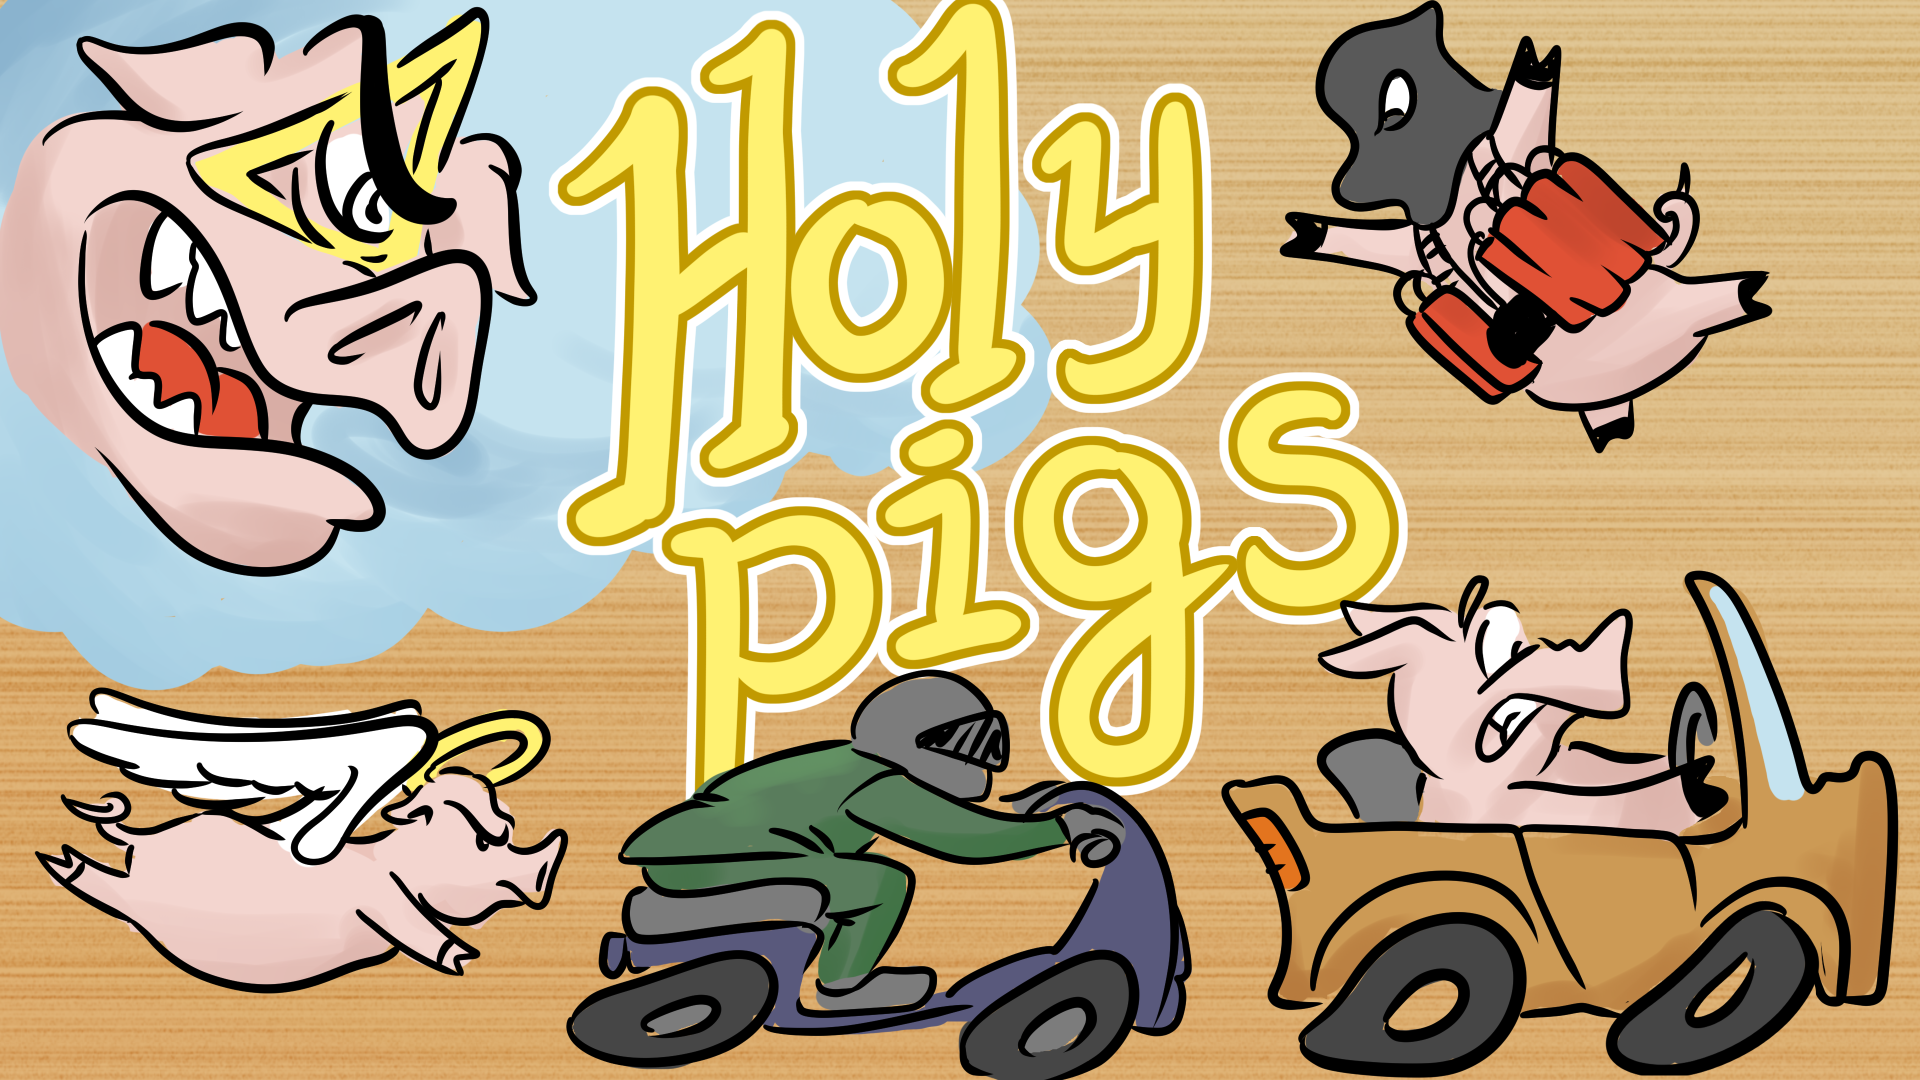 Holy Pigs